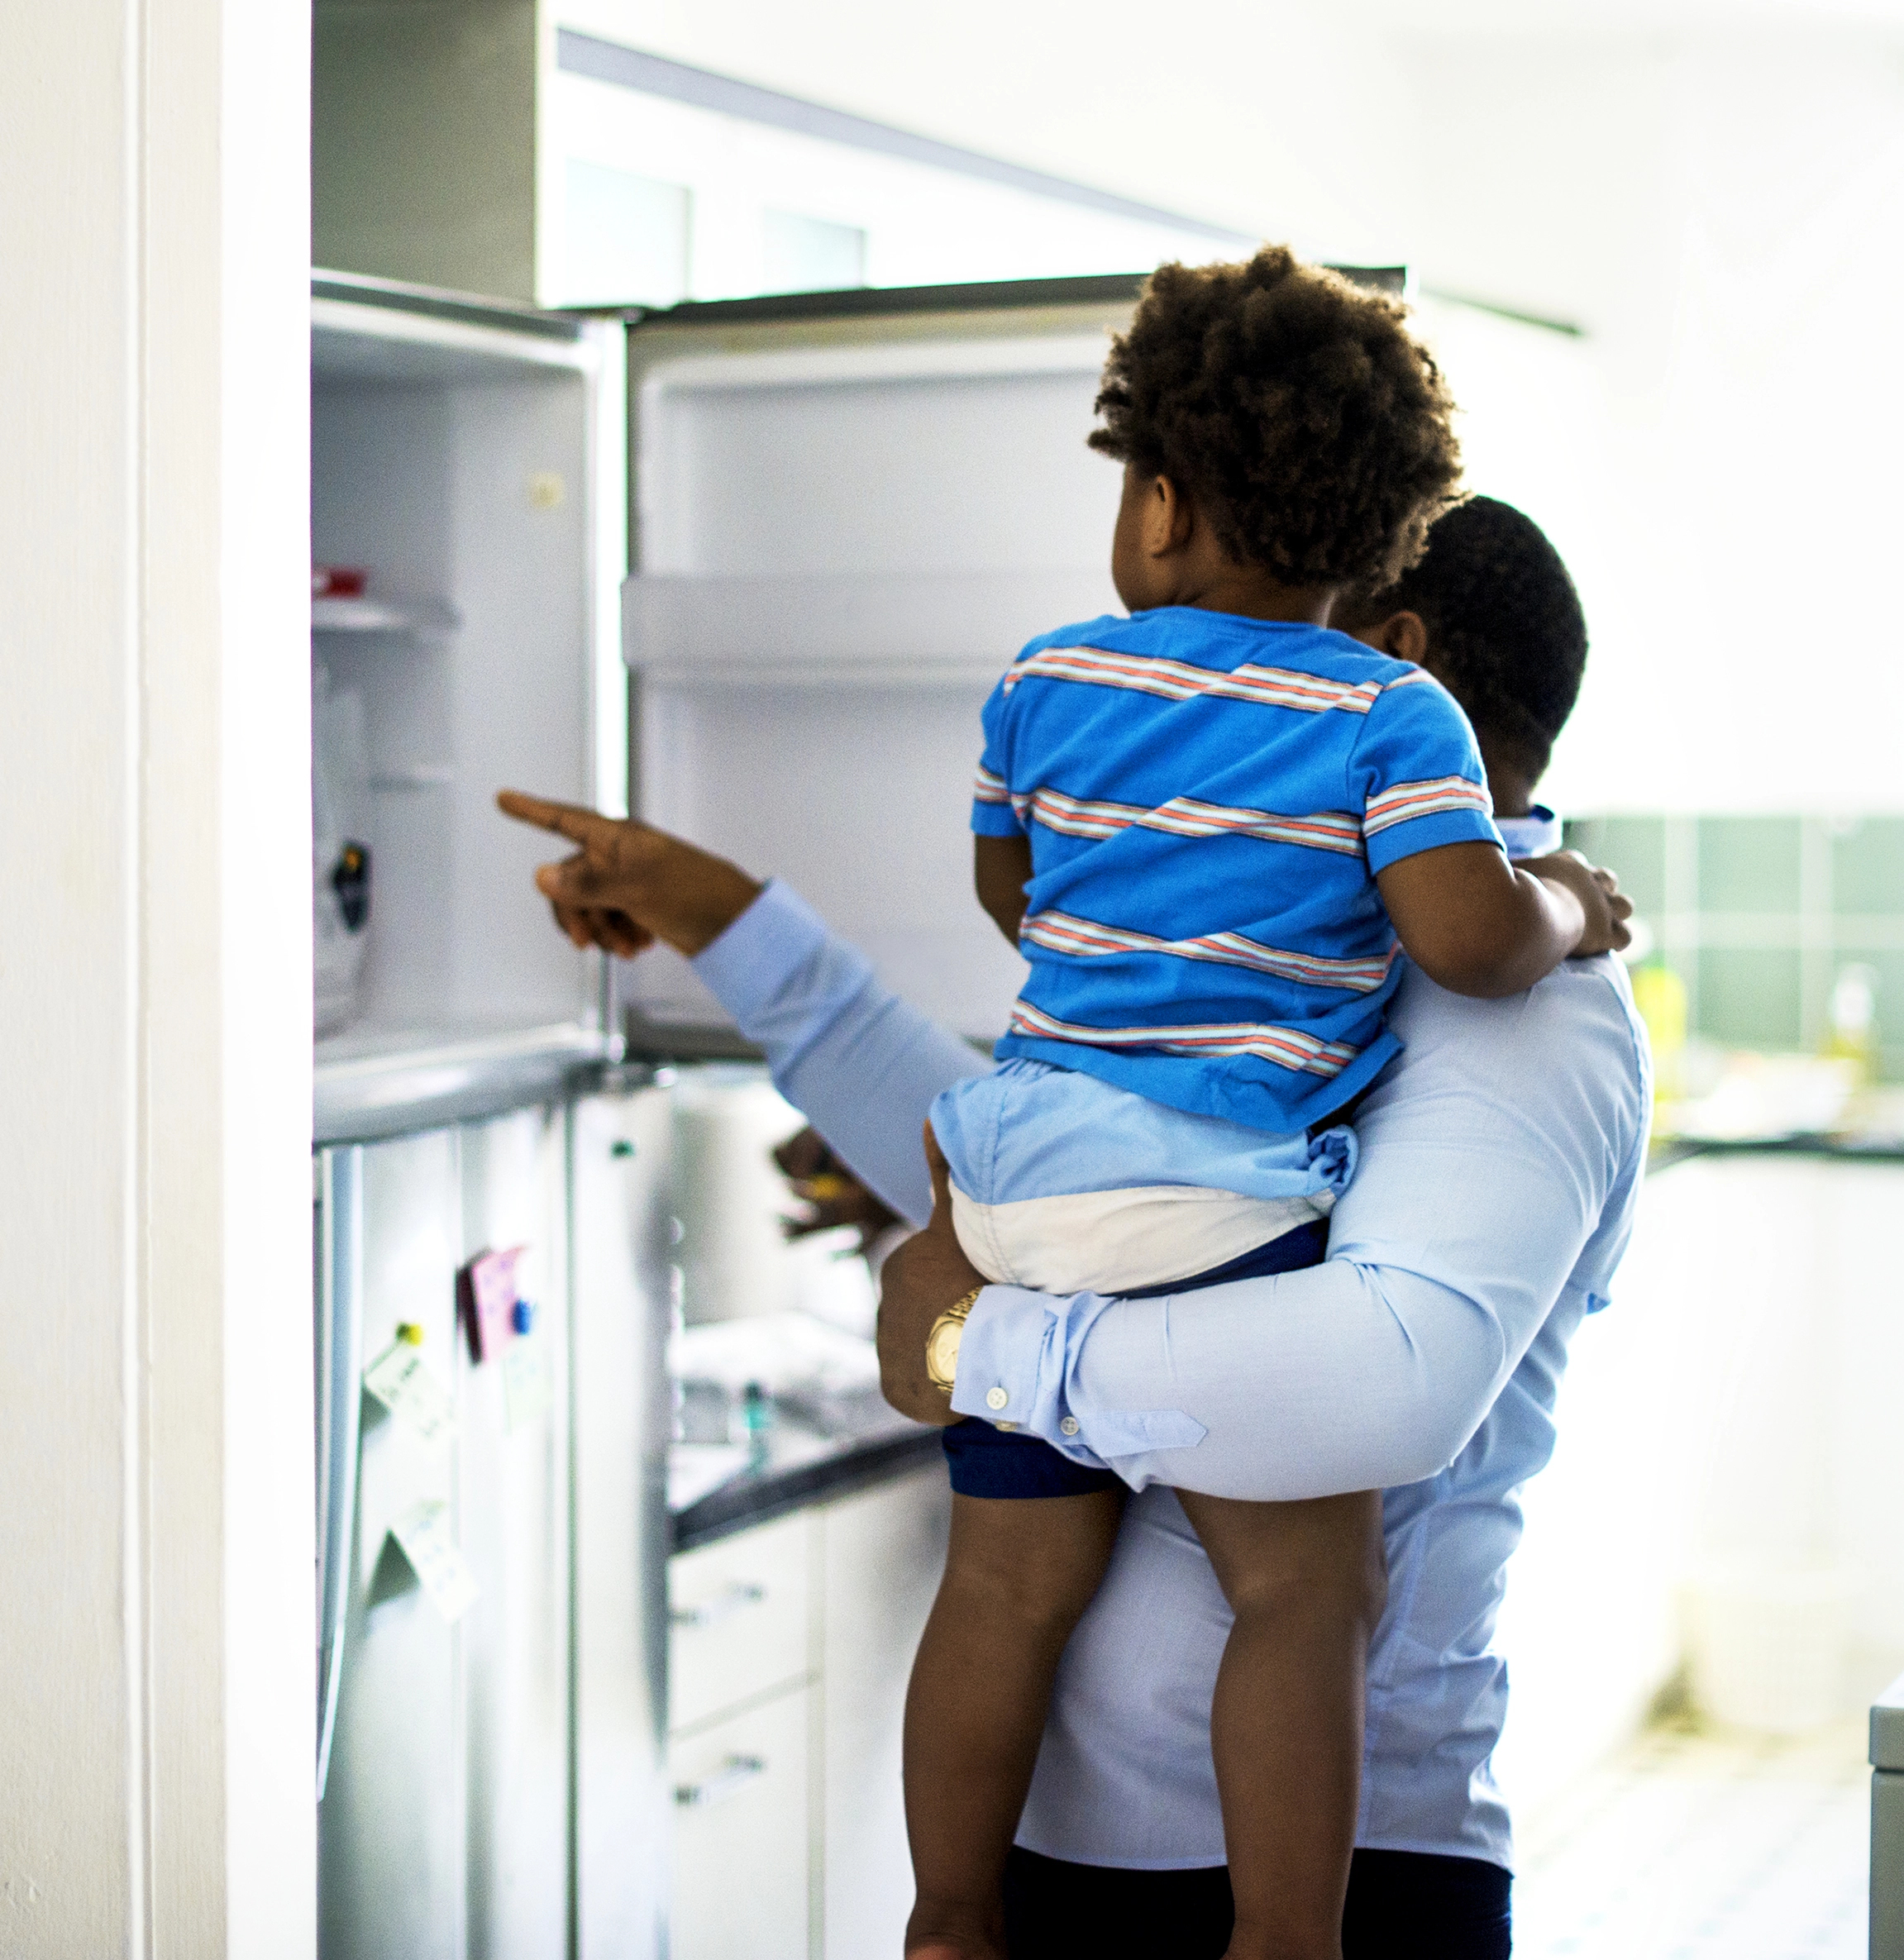 A dad opens the fridgerator with his son while wasting energy by leaving the door open